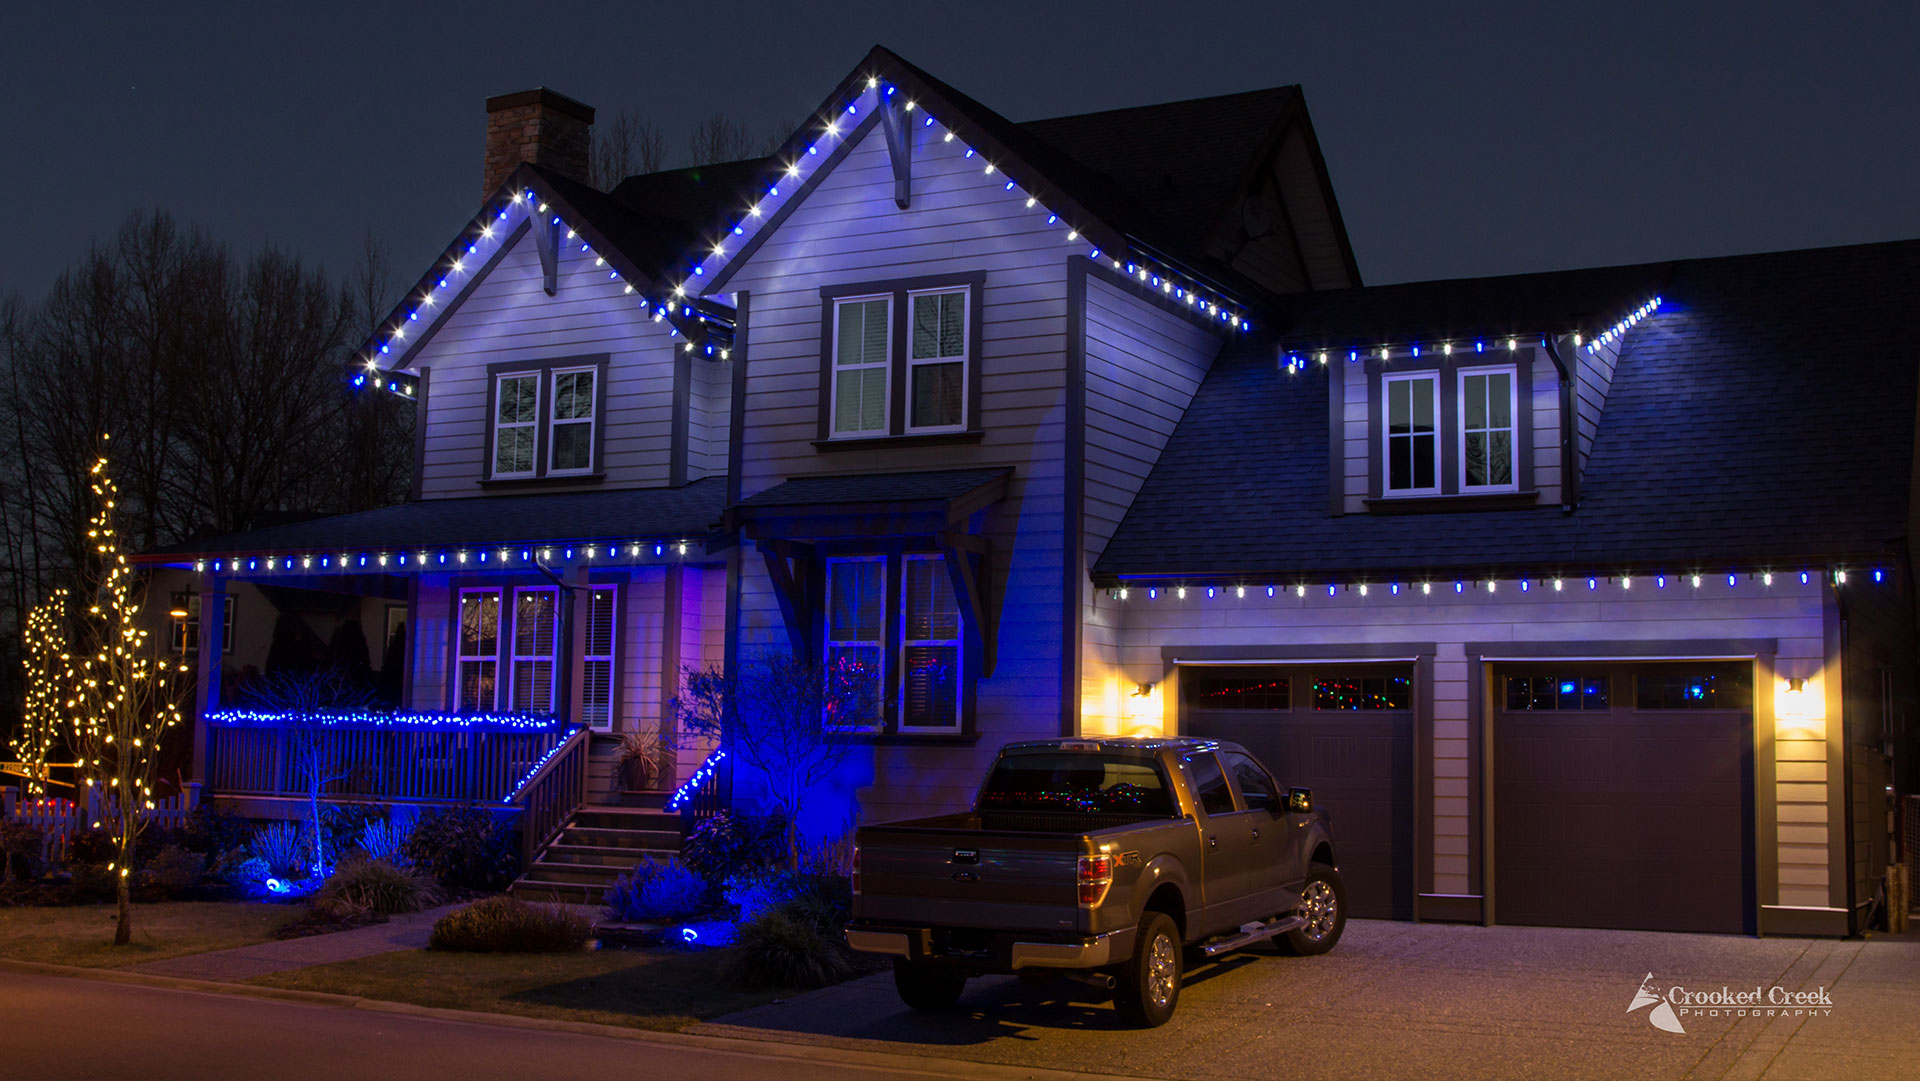 What Makes Gemstone Lights the Right Choice for Holiday Lighting